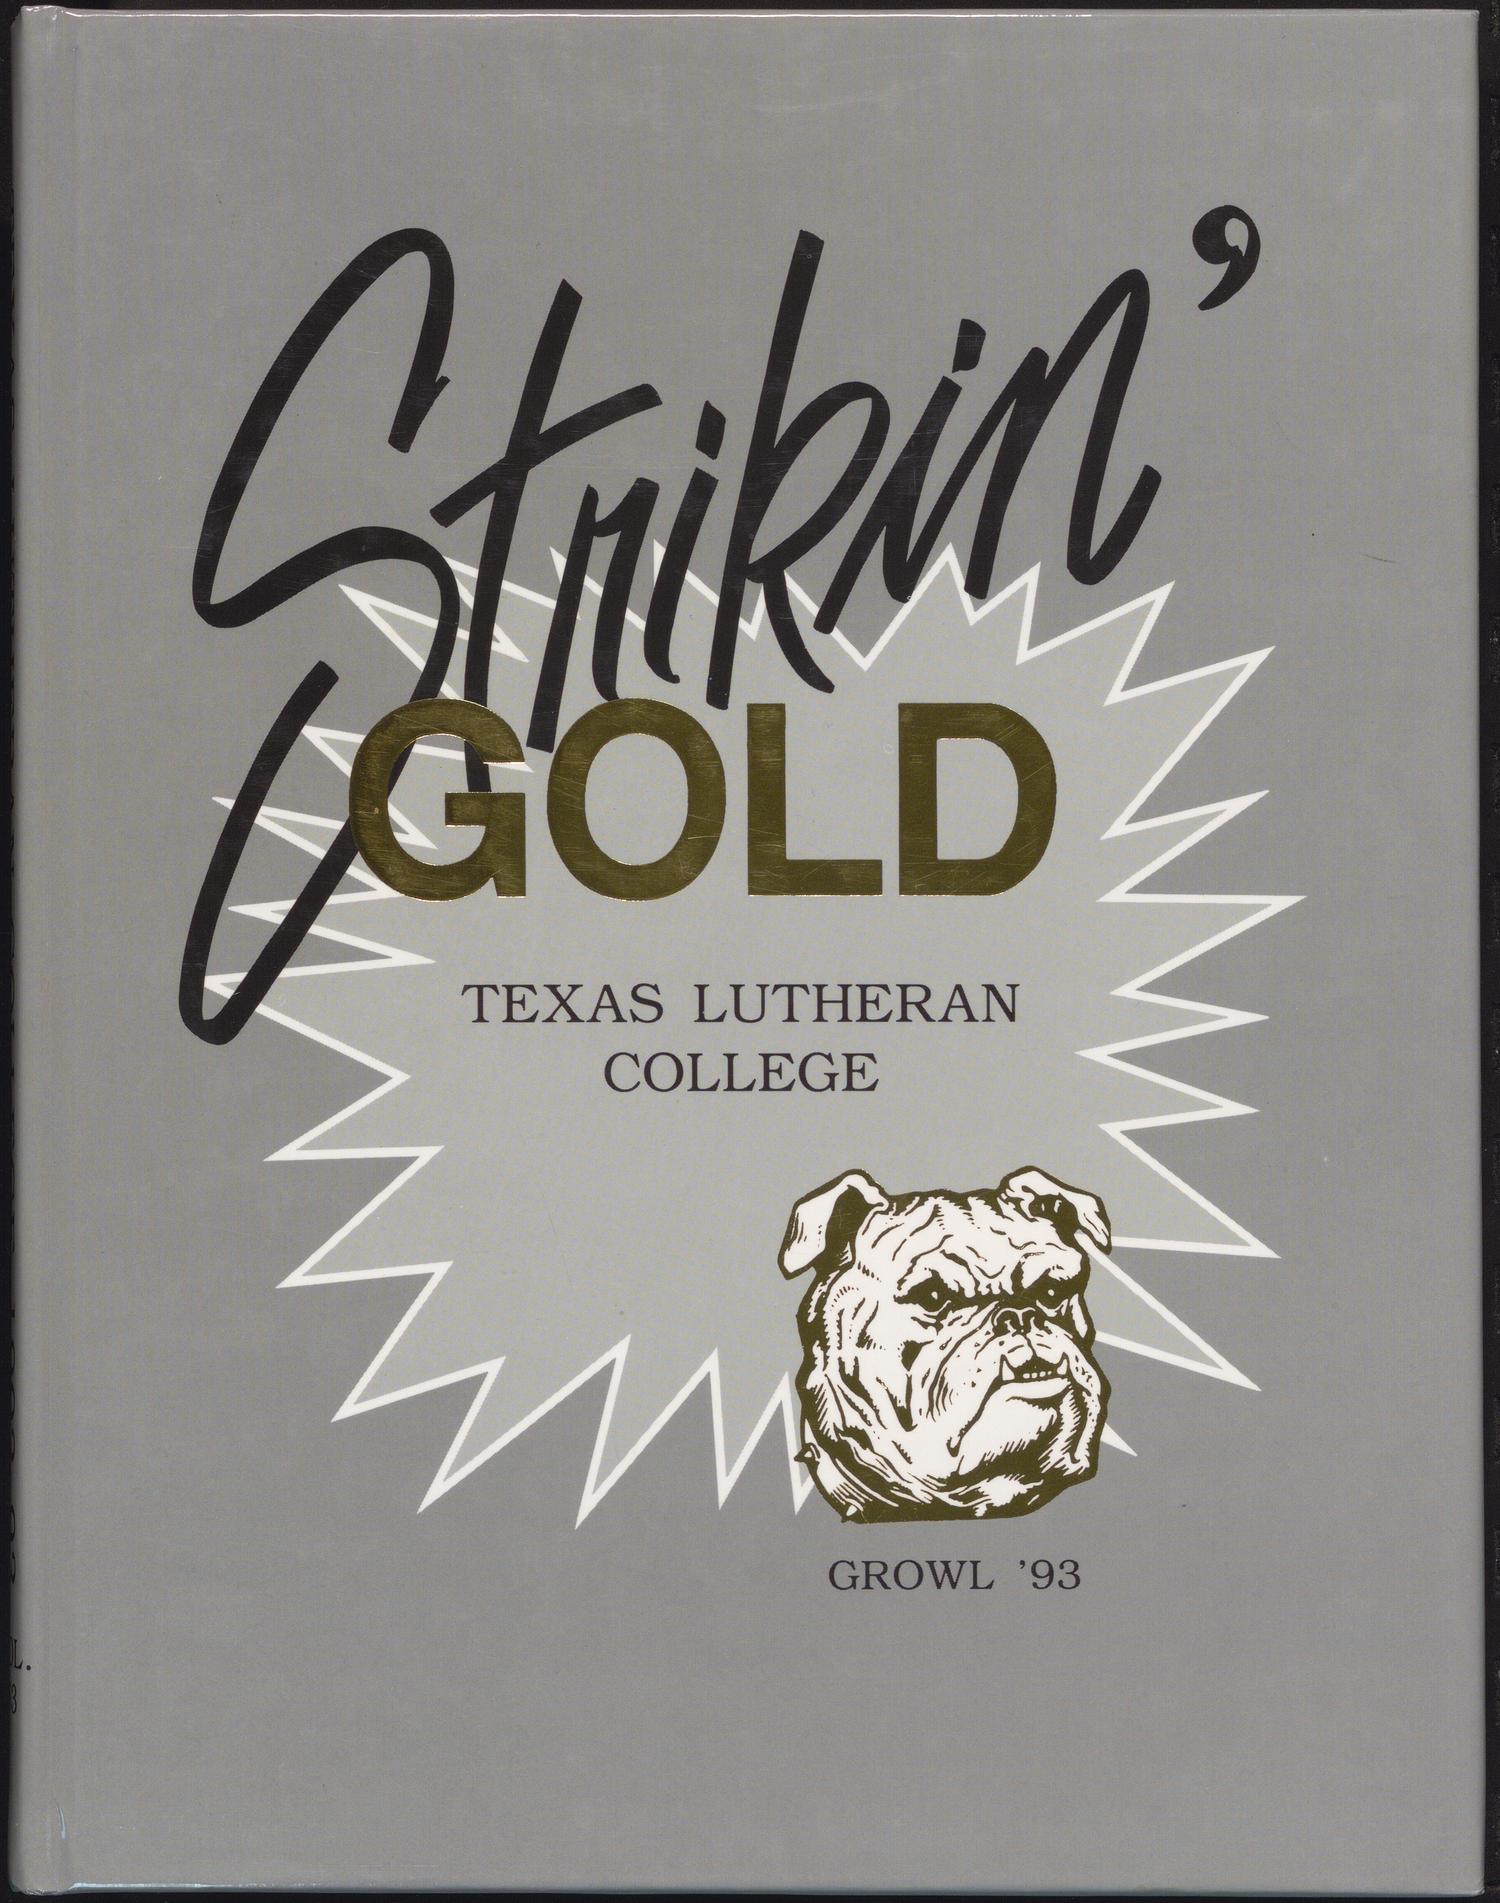 The Growl, Yearbook of Texas Lutheran College: 1993
                                                
                                                    Front Cover
                                                